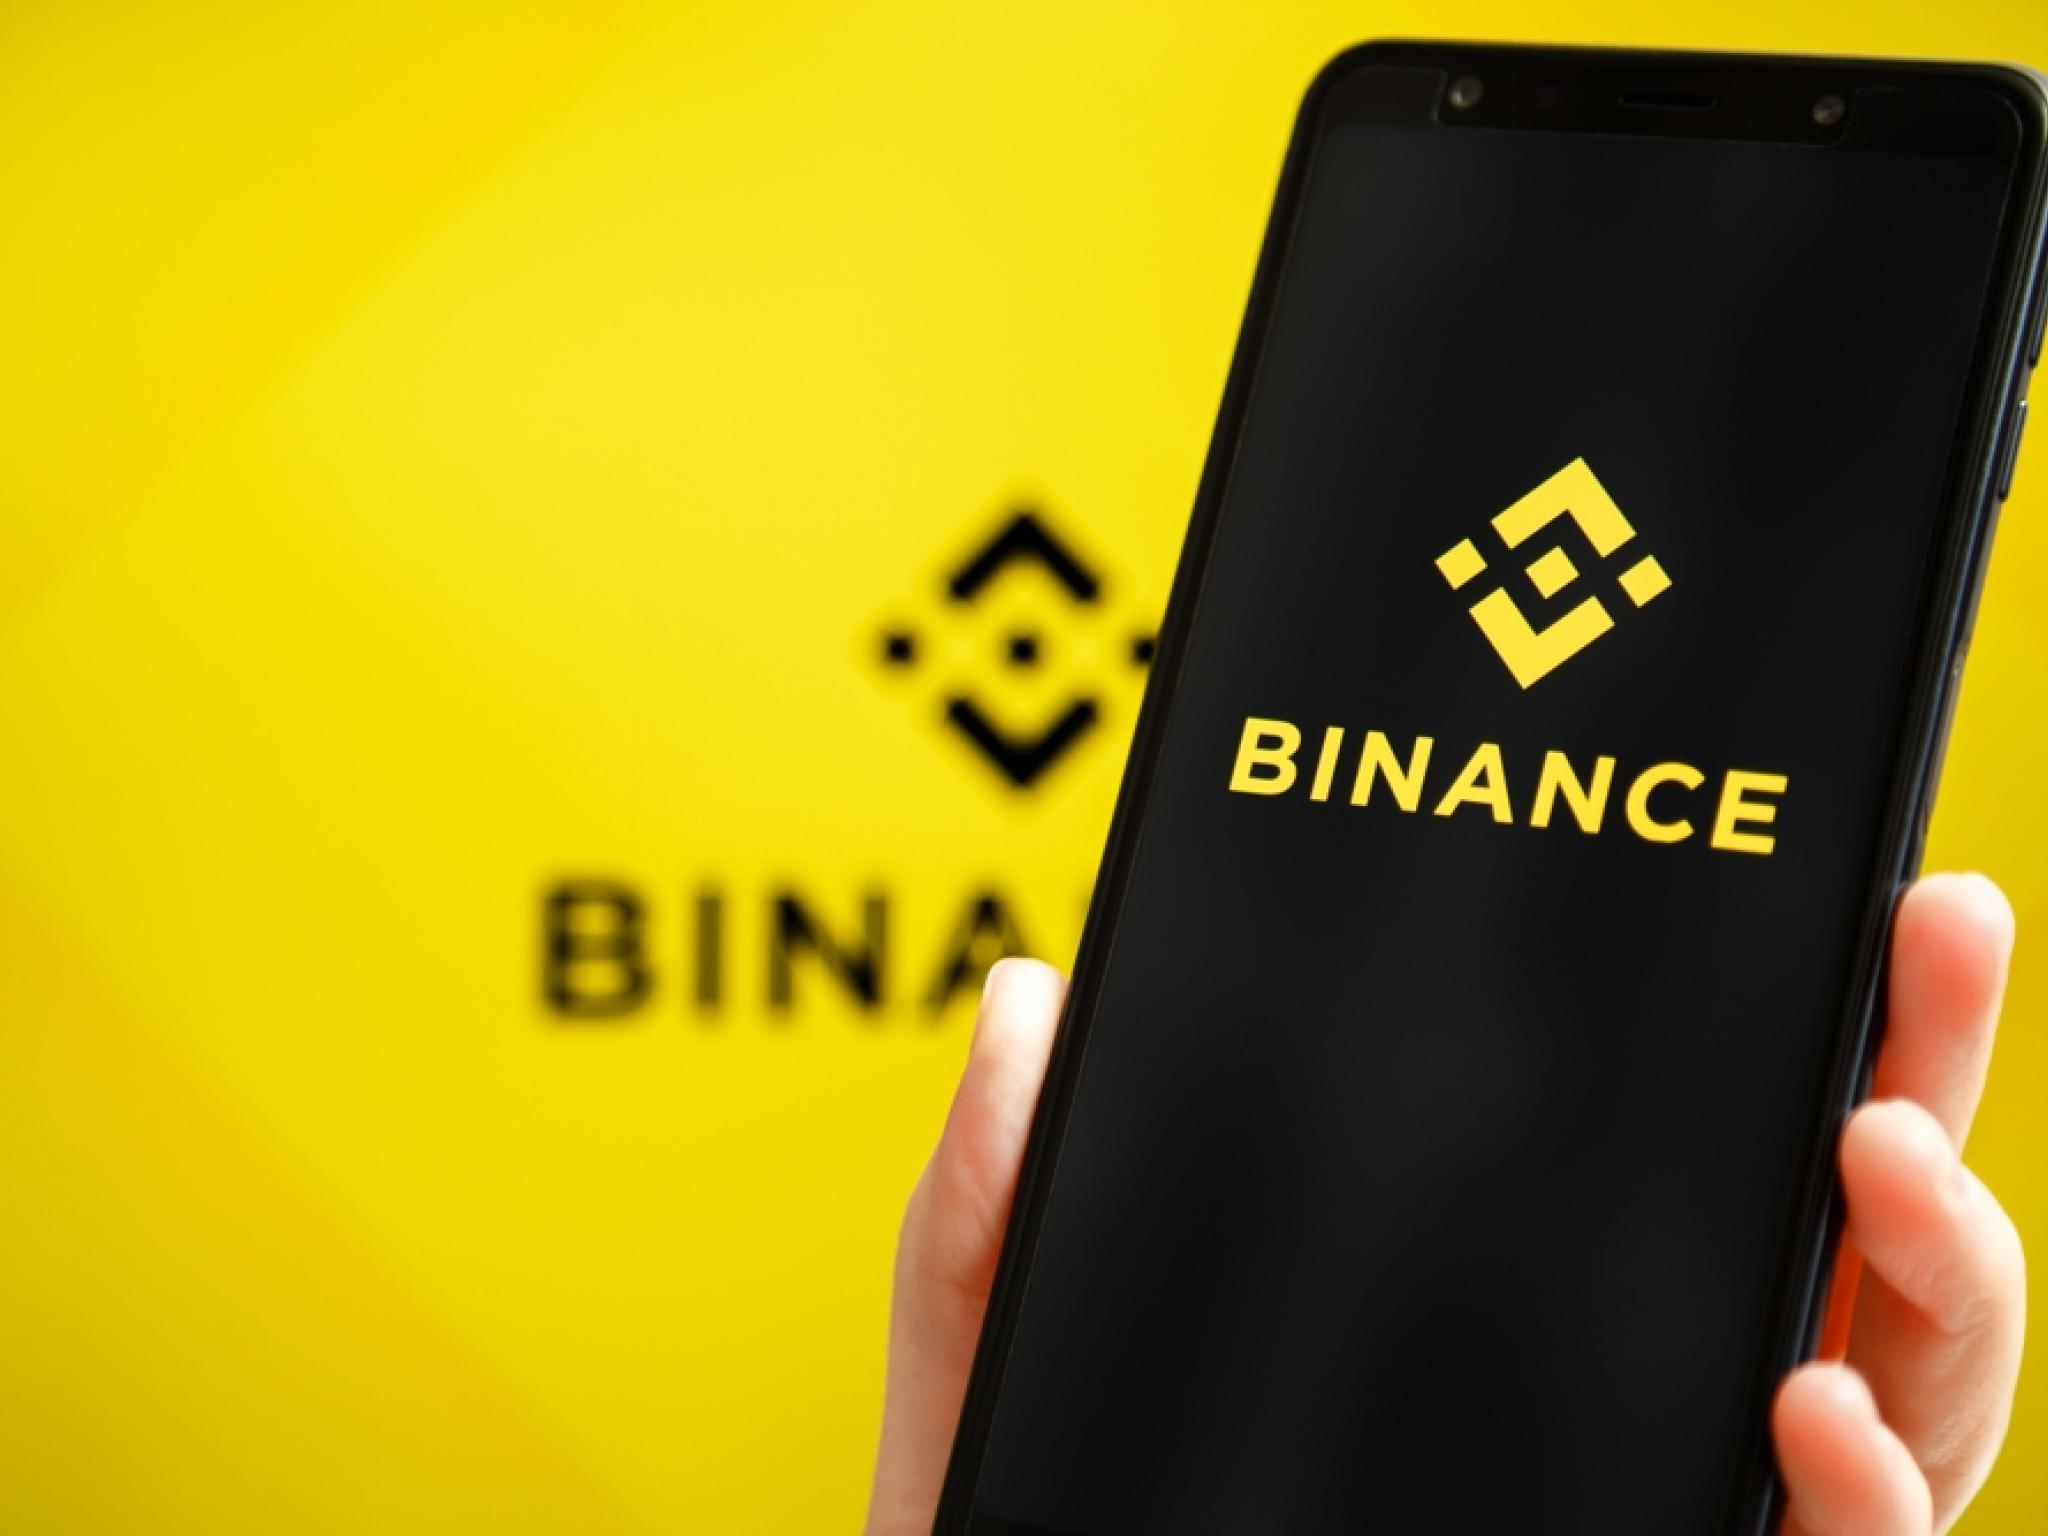  binance-fined-225m-by-indias-financial-intelligence-unit-for-anti-money-laundering-violations-updated 